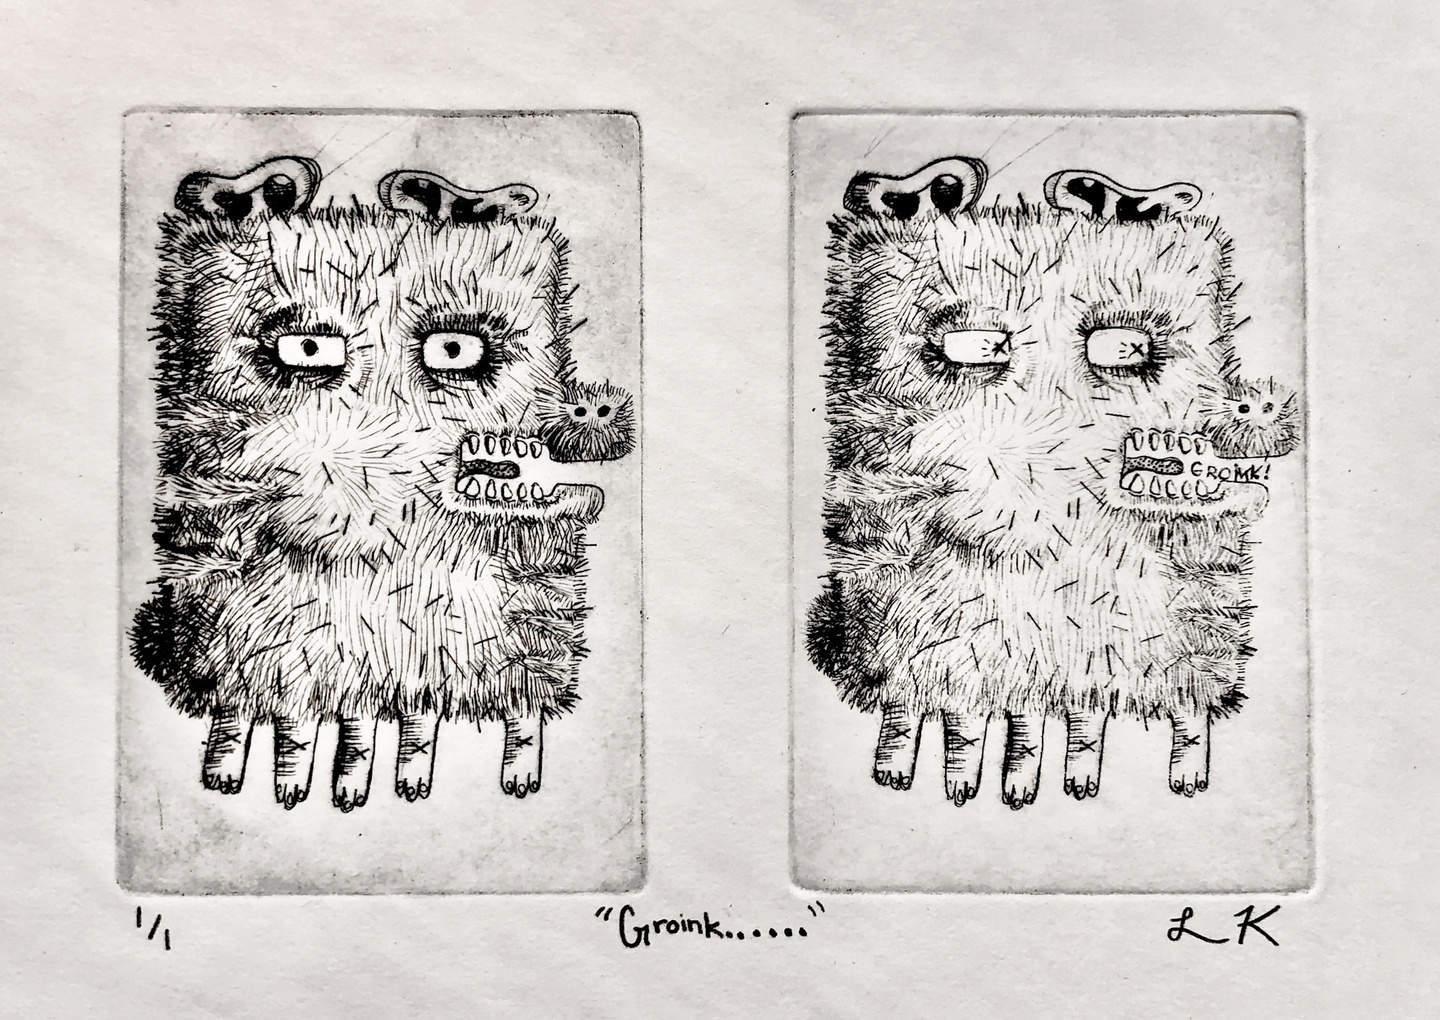 Two side by side relief prints of black line drawings of a little boxy-shaped, hairy creature with six legs, human ears situated on top of its head, and pointy teeth. In the second image the creature says "Groink!"